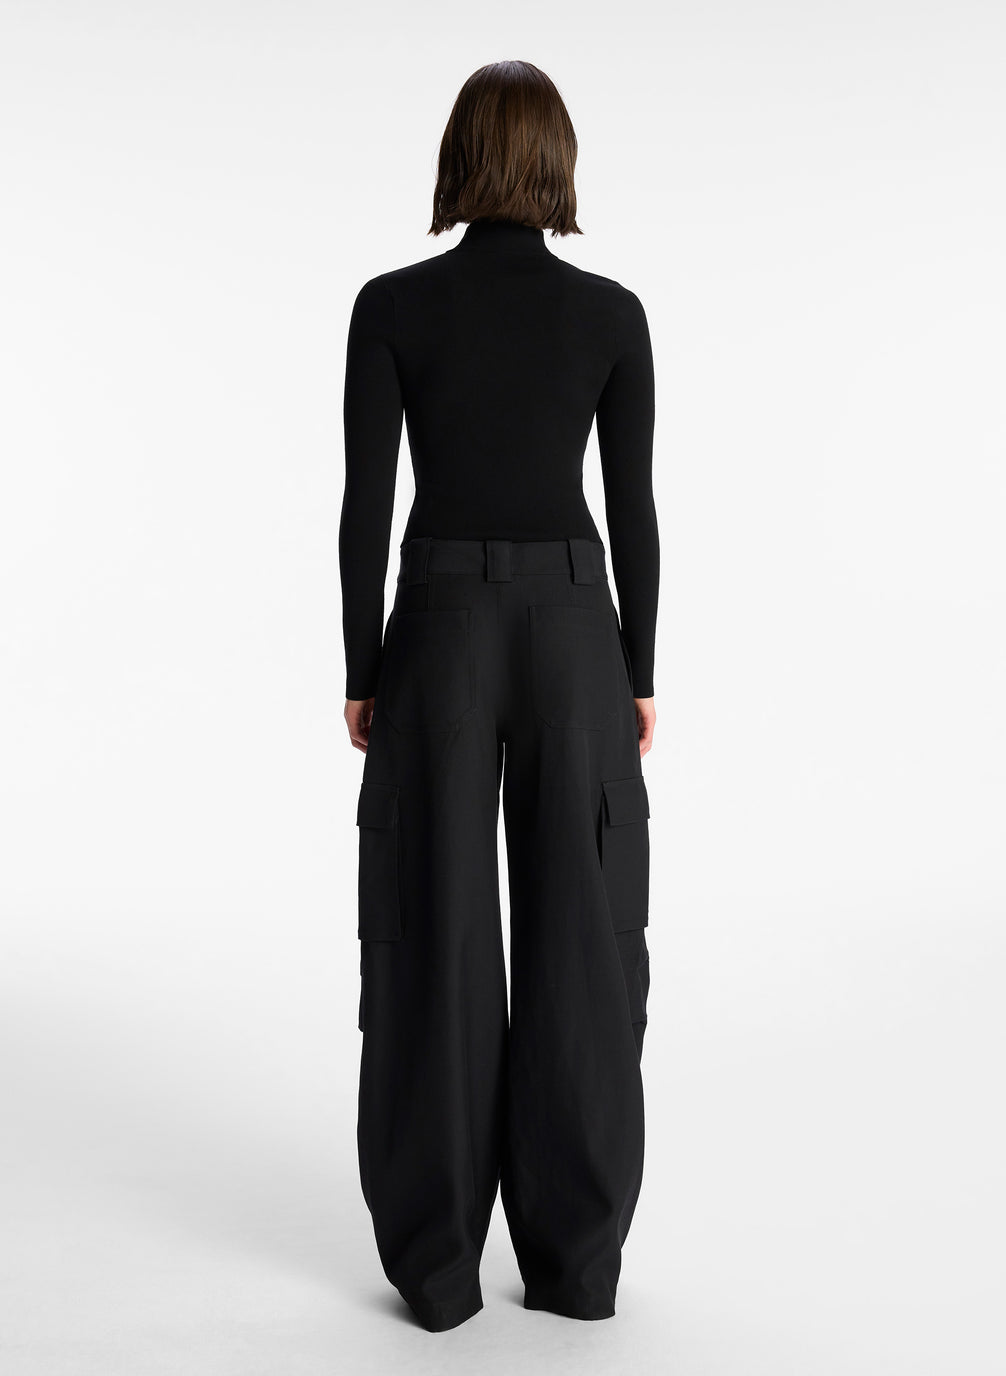 back view of woman wearing black half zip compact knit long sleeve top and black pants